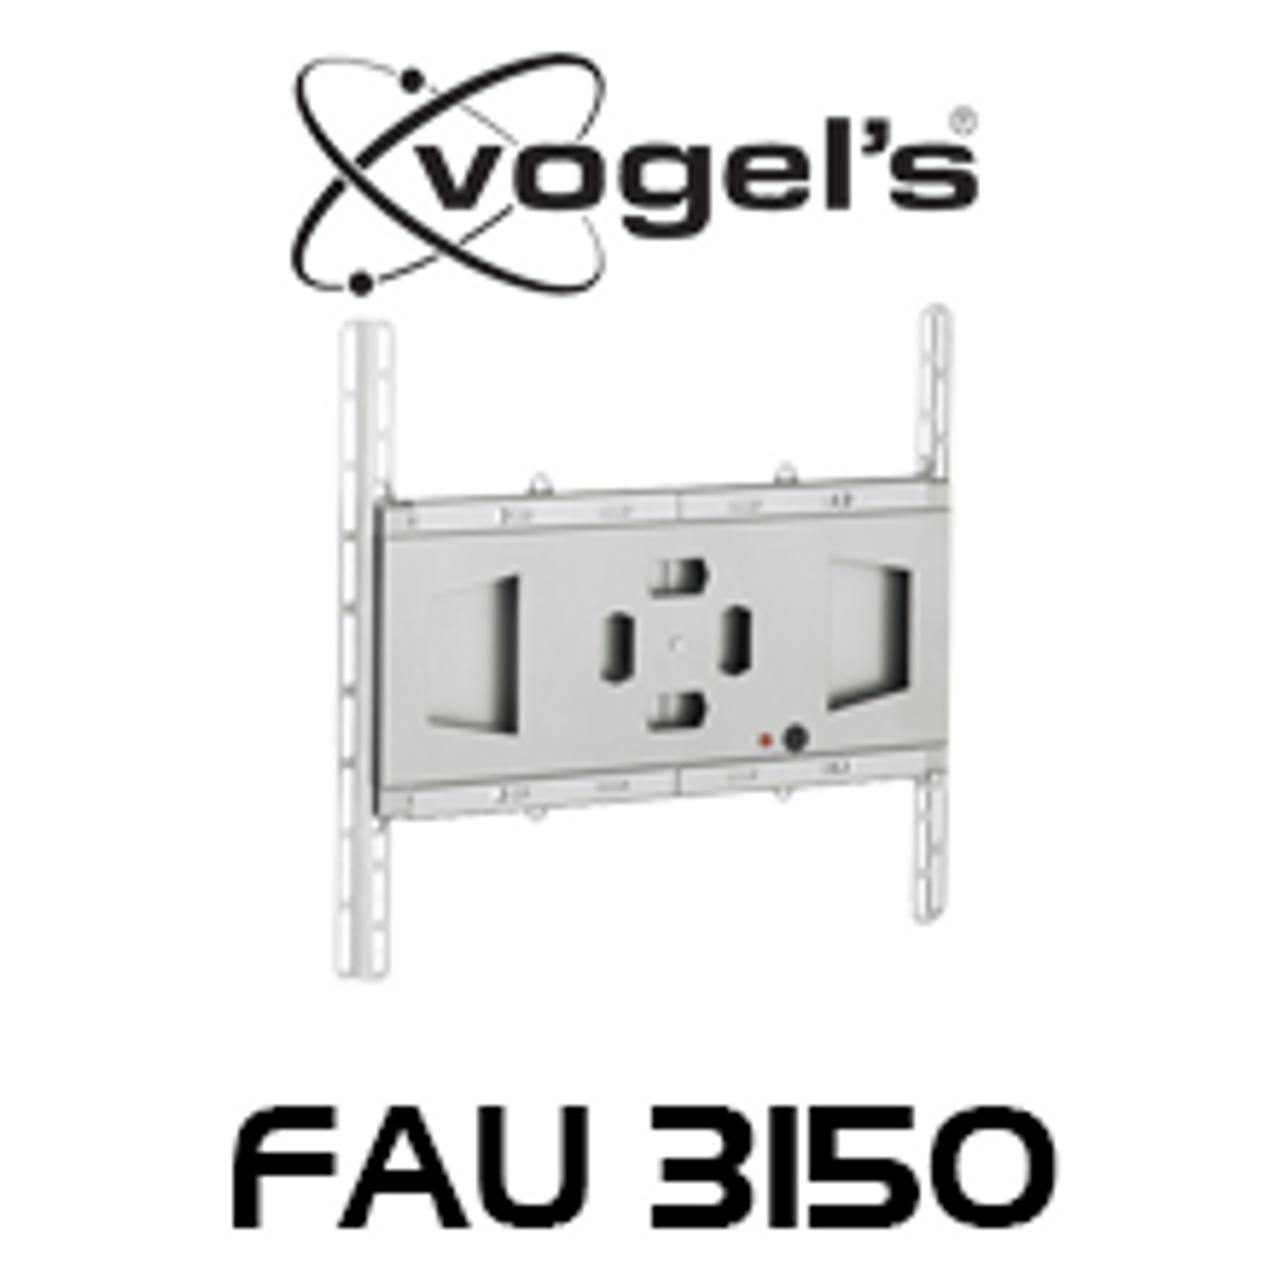 Vogels FAU3150 Universal Flat Display Interface for 30-65" TVs